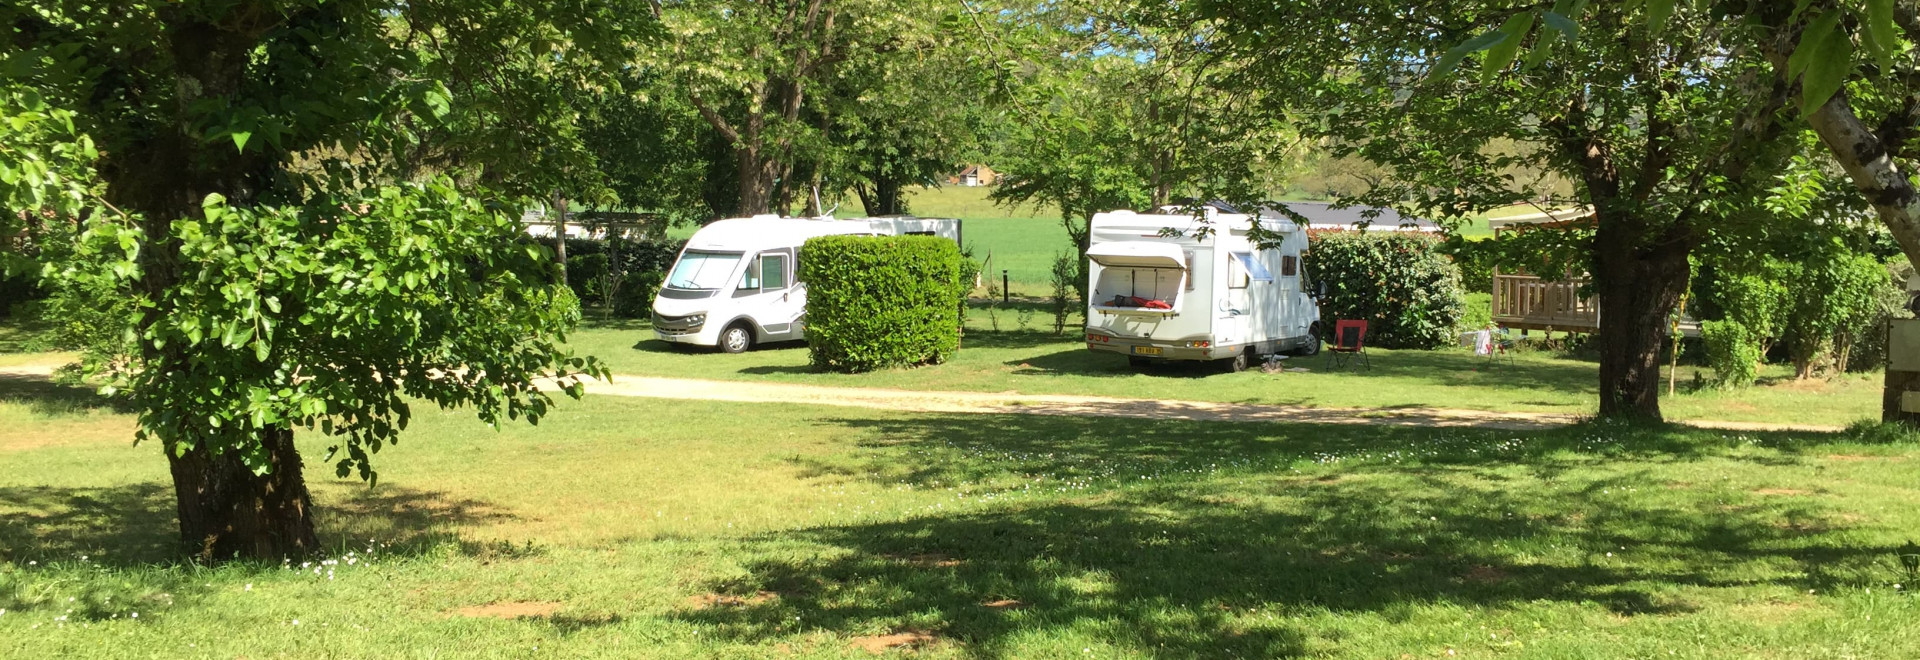 campings car domaine des chenes verts.jpg